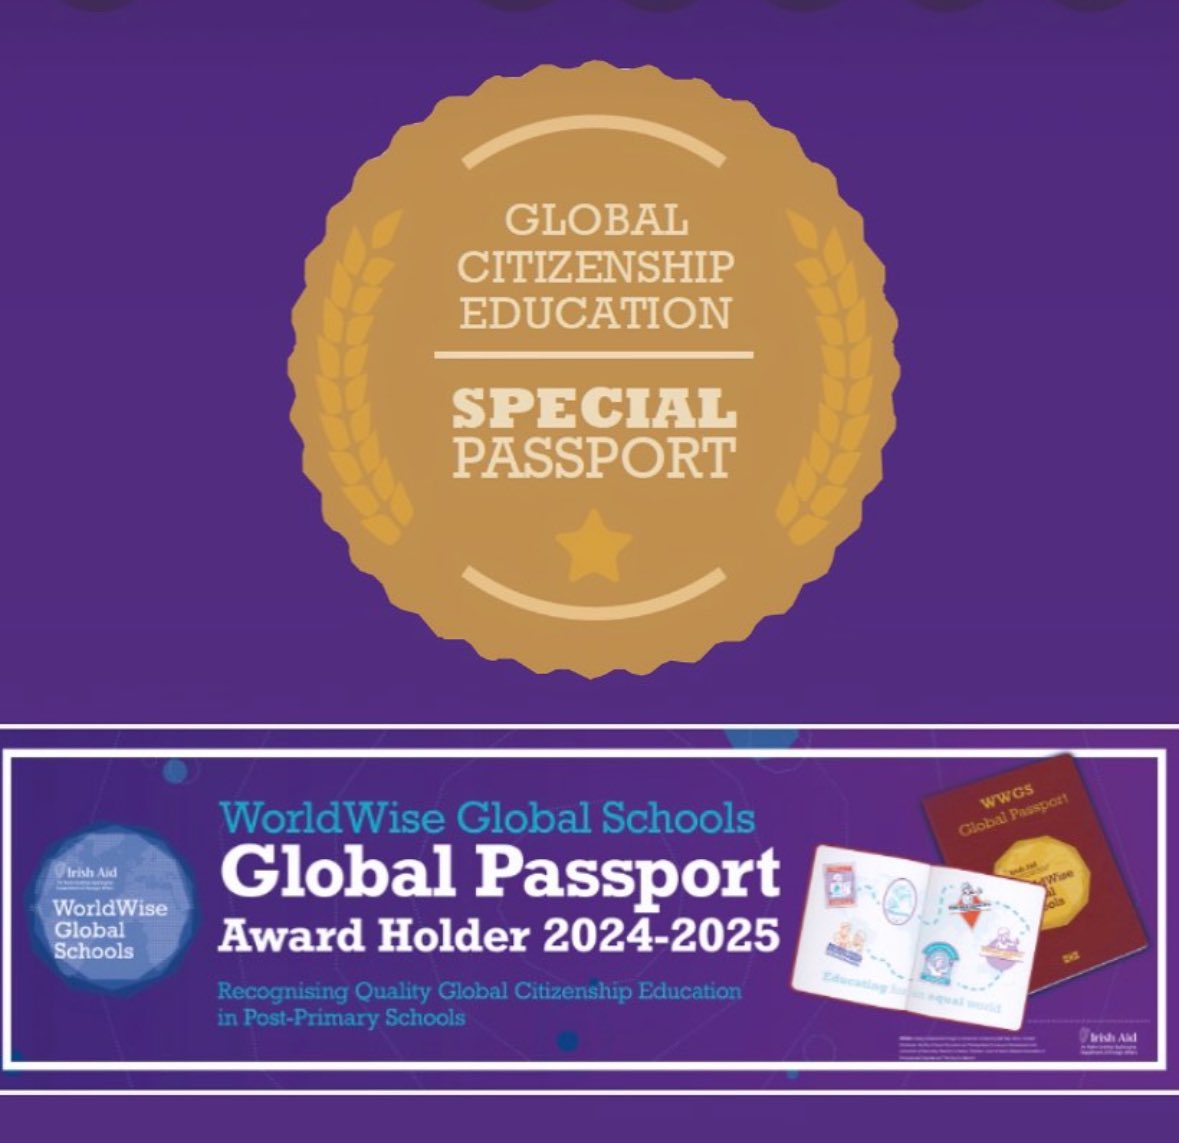 Feeling proud @galwayetss having just been awarded the @WorldWise_Irl Global Citizenship Education Special Passport. This is awarded to schools for their exceptional engagement with GCE. #globalcitizenshipeducation @EducateTogether